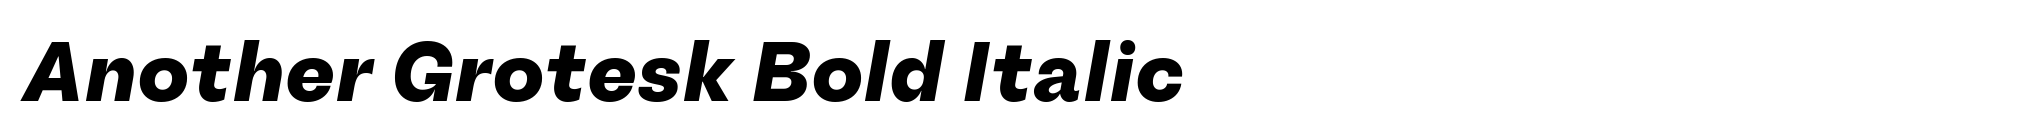 Another Grotesk Bold Italic image